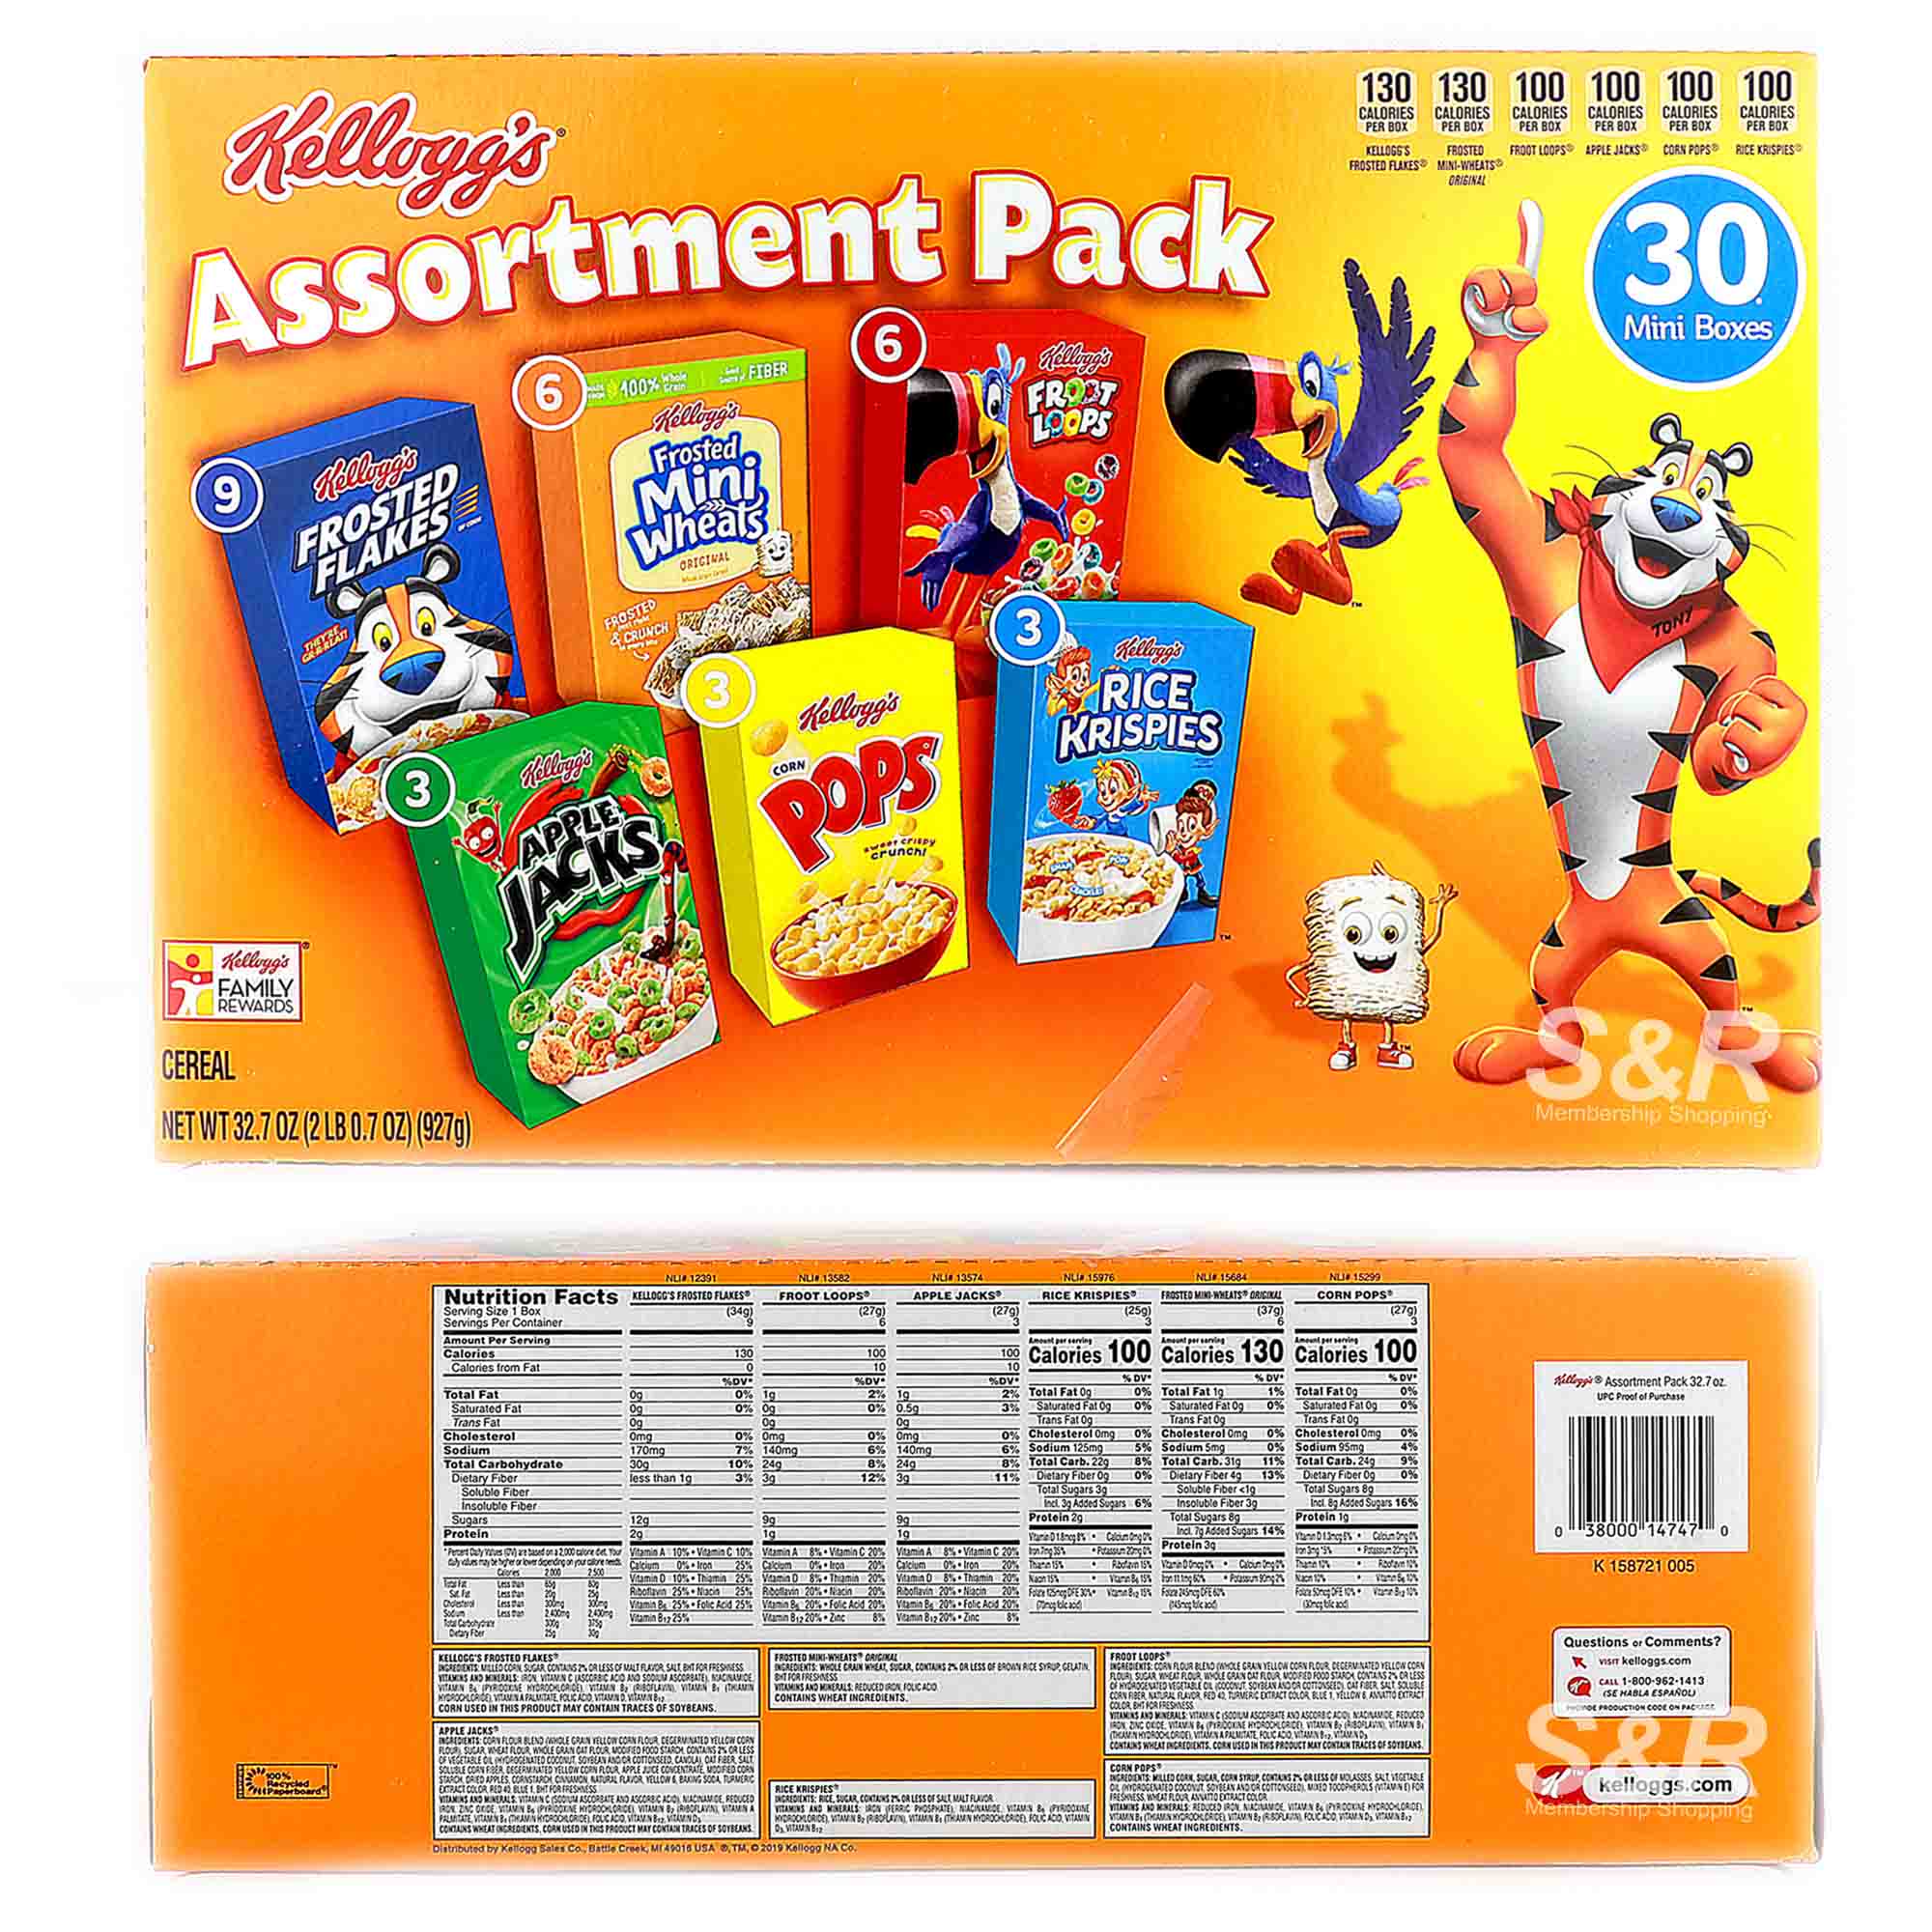 Assortment Pack Cereal